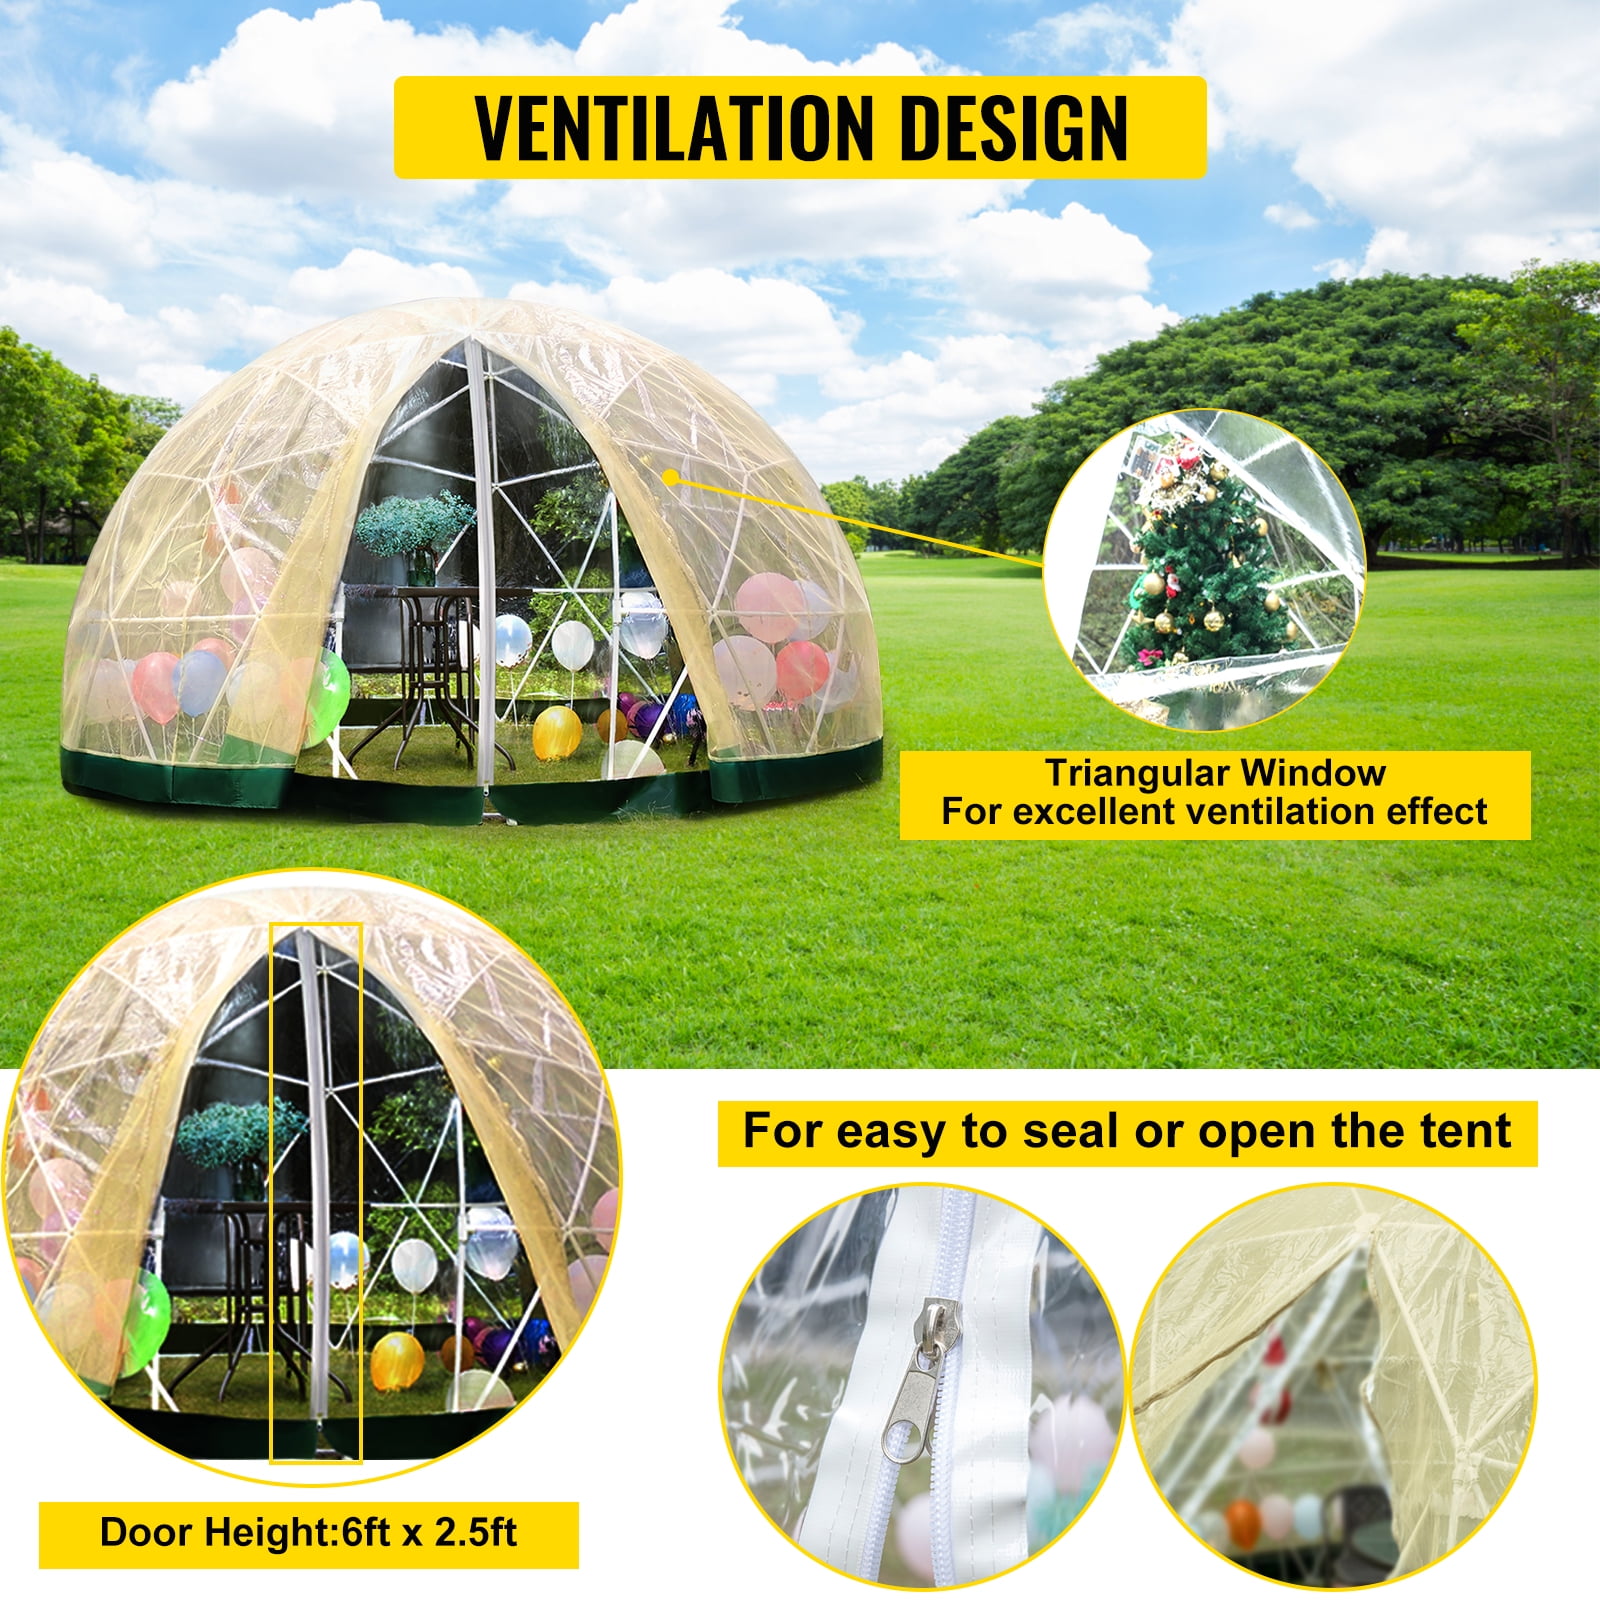 VEVOR Garden Dome with PVC Cover and Mesh Cover - Geodesic Dome - On Sale -  Bed Bath & Beyond - 37838454